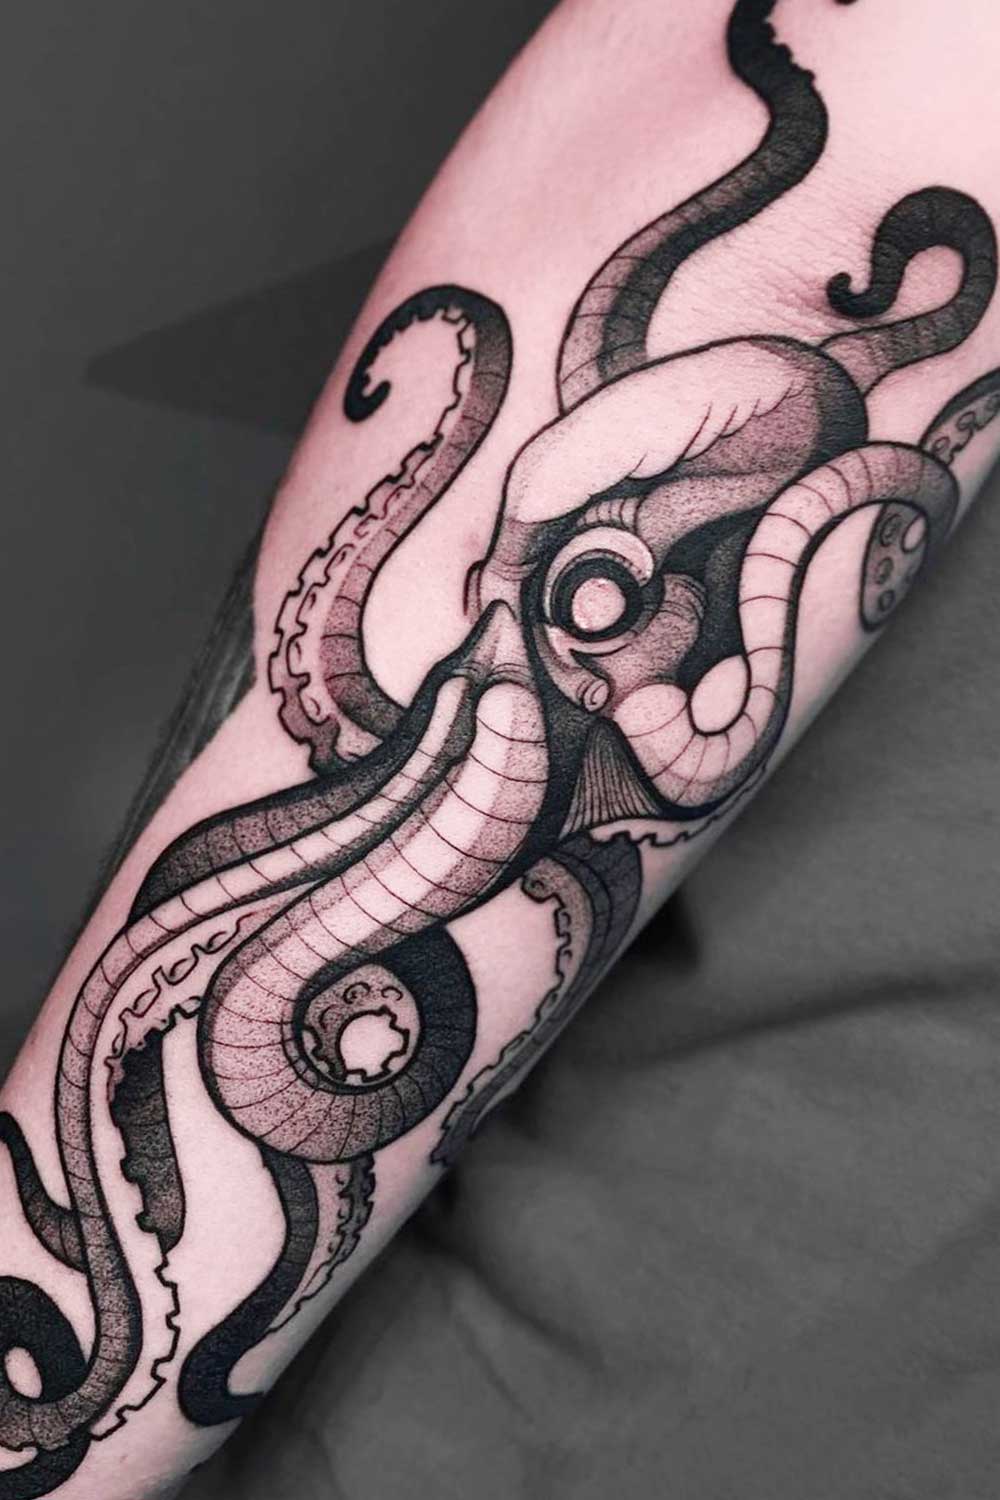 Black and White Tattoo with Octopus